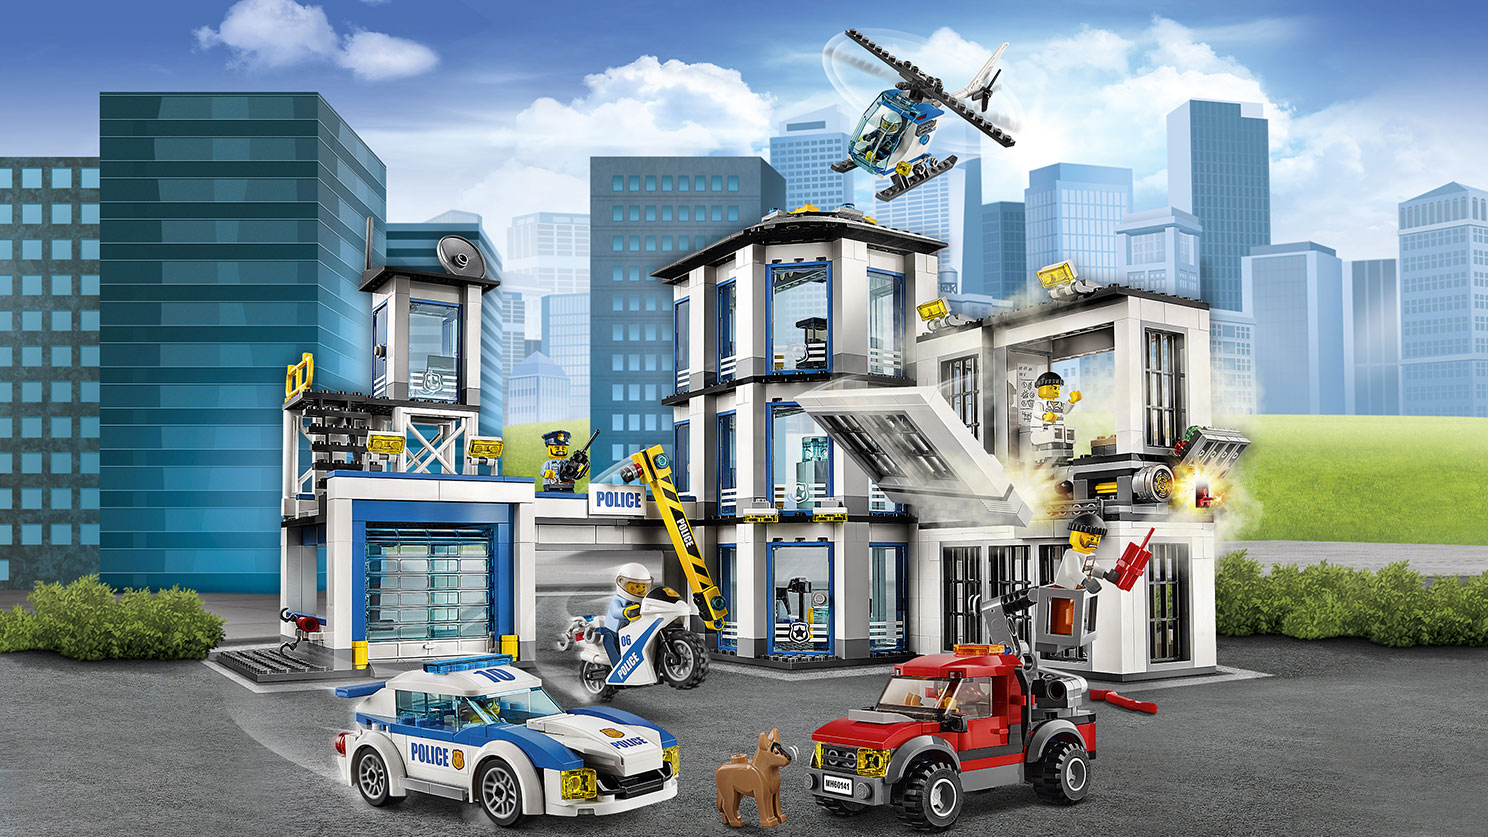 LEGO 60141 "Police Station" Building Toy 